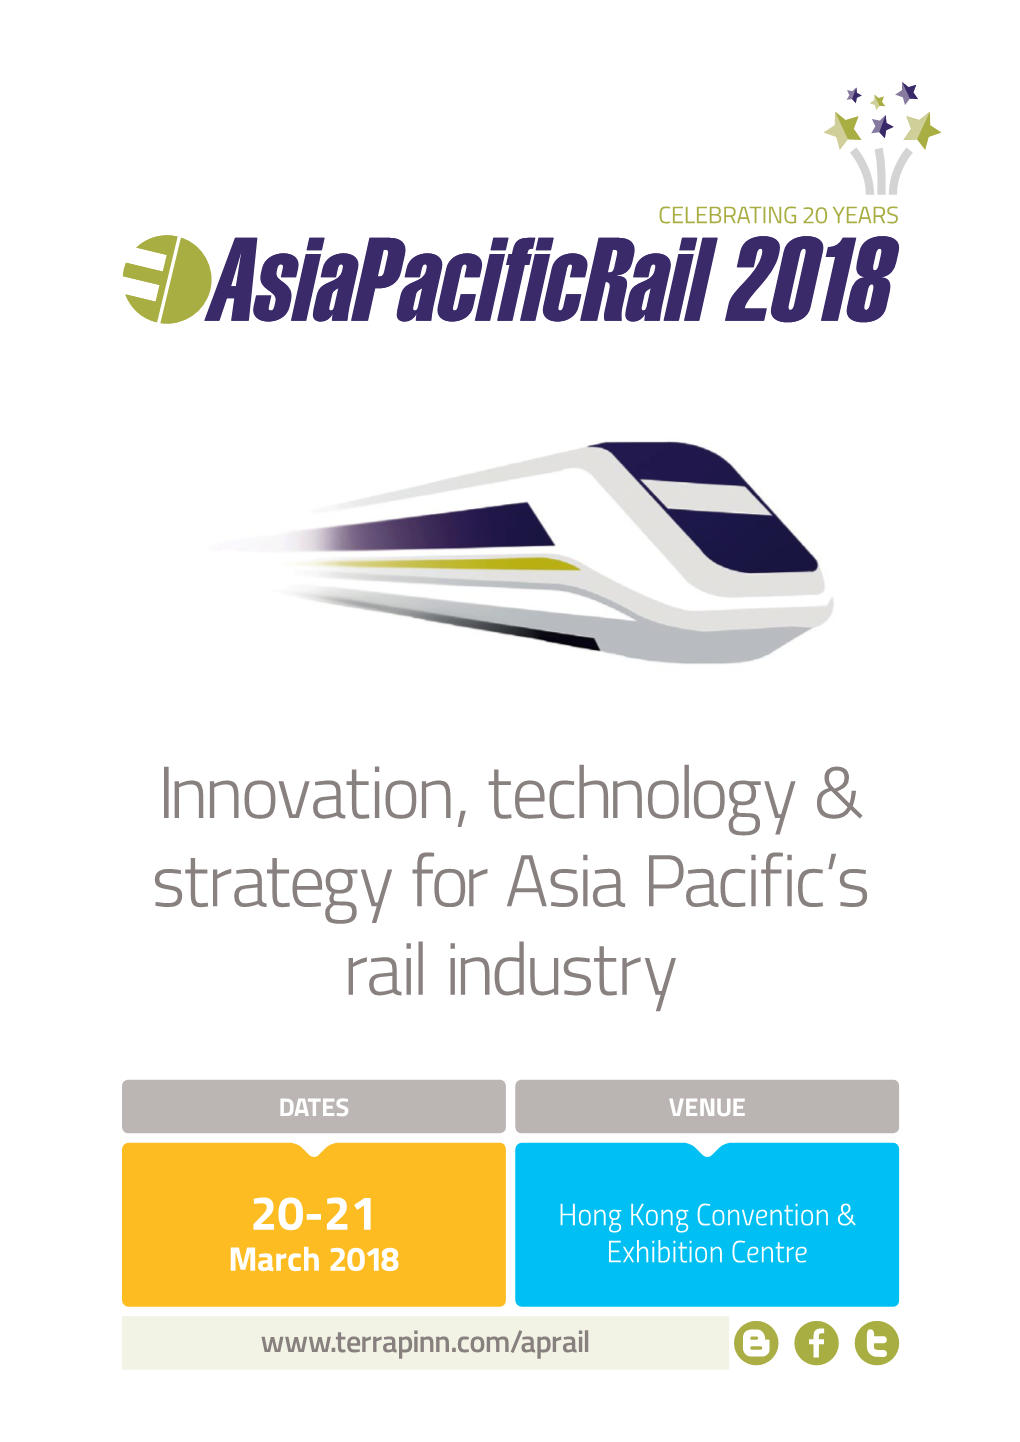 Innovation, Technology & Strategy for Asia Pacific's Rail Industry